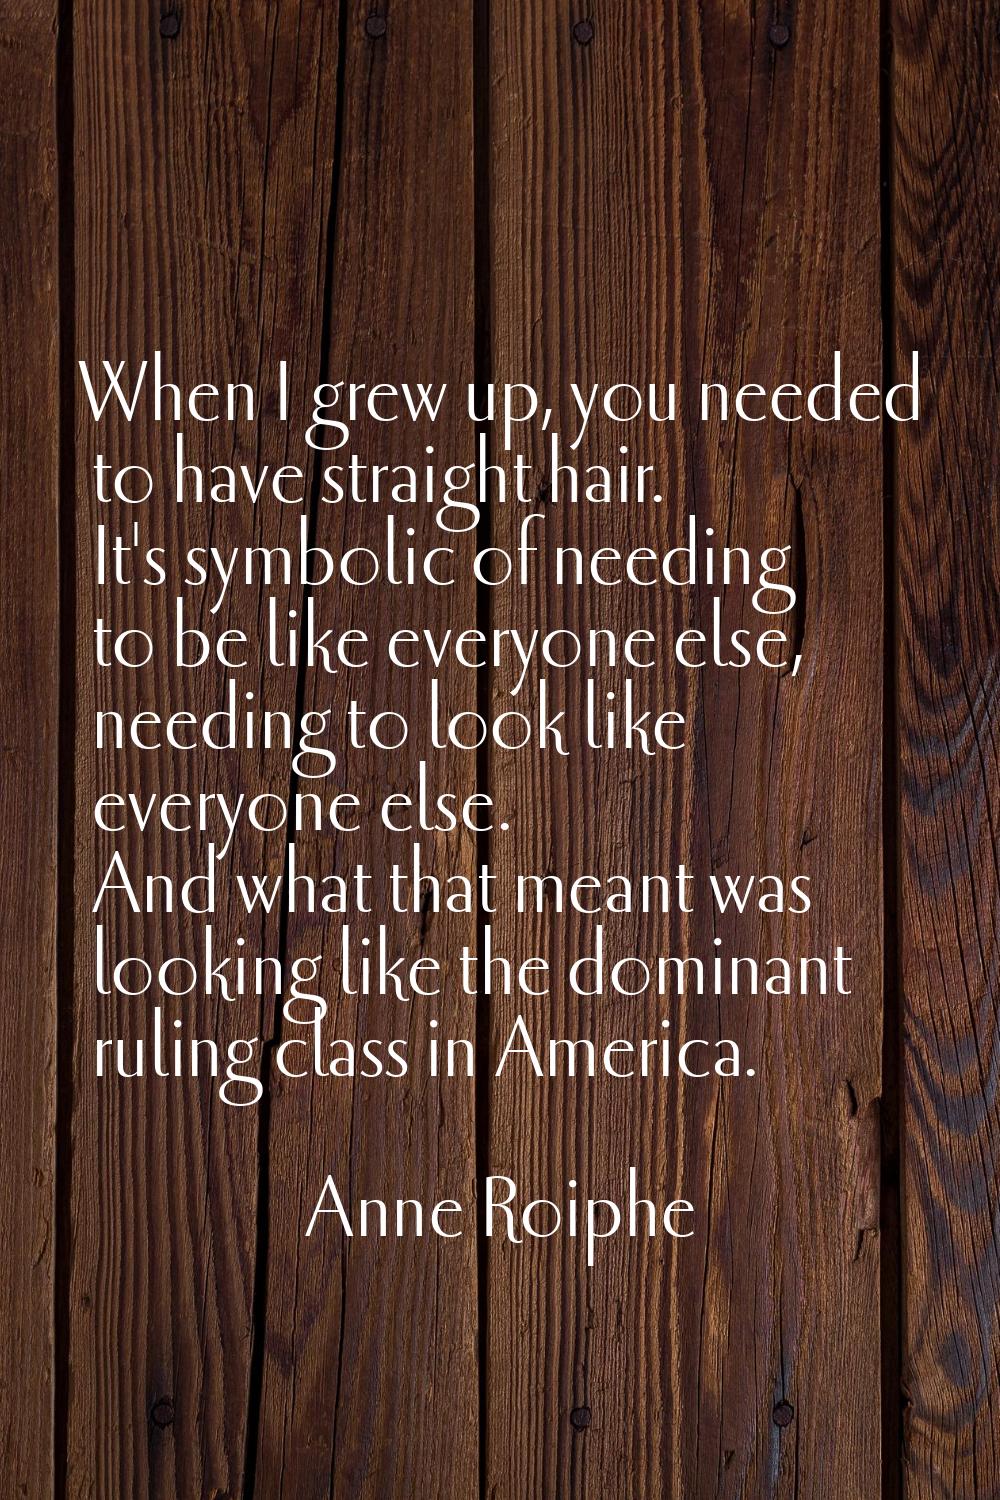 When I grew up, you needed to have straight hair. It's symbolic of needing to be like everyone else